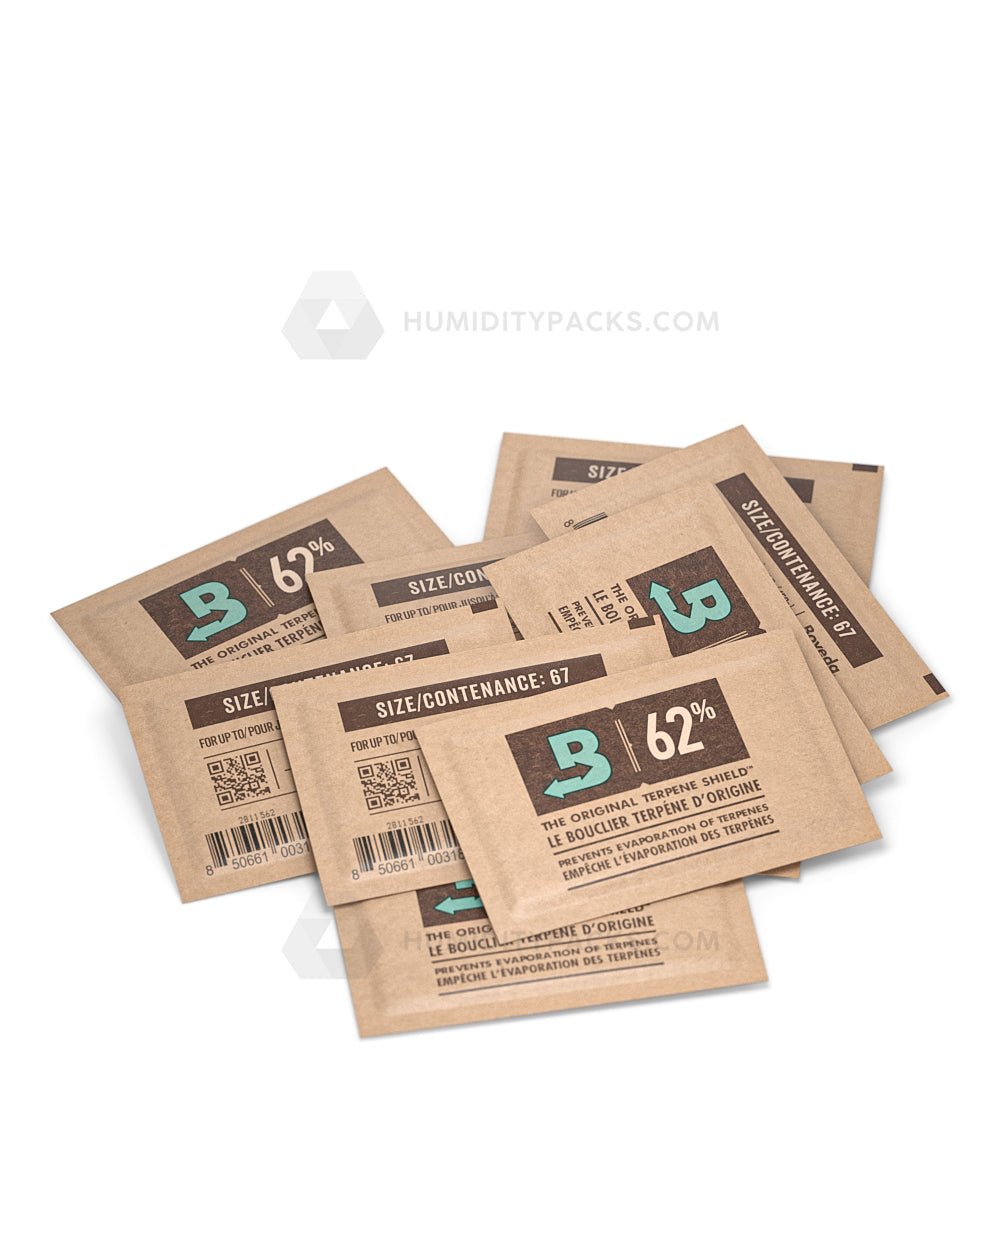 Boveda 62% Two-Way Humidity Control Pack For Storing 1 lb – Size 67 –  Single – Moisture Absorber for Storage Containers – Humidifier Pack –  Individually Wrapped Hydration Packet – More Sticky